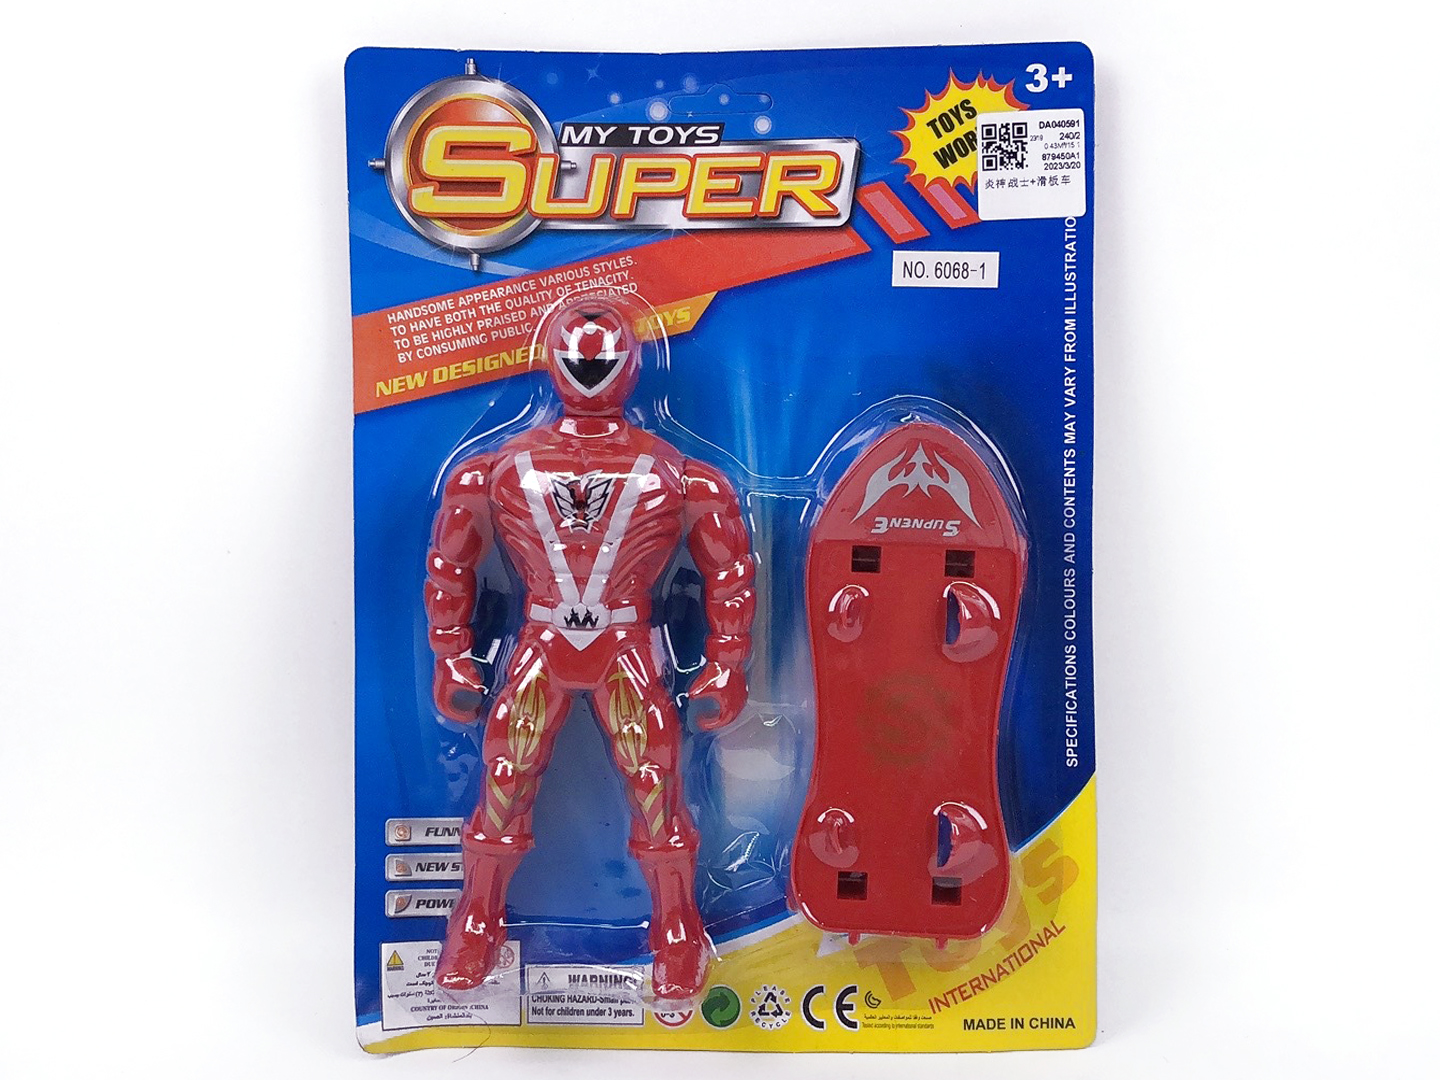 Super Man & Scooter toys